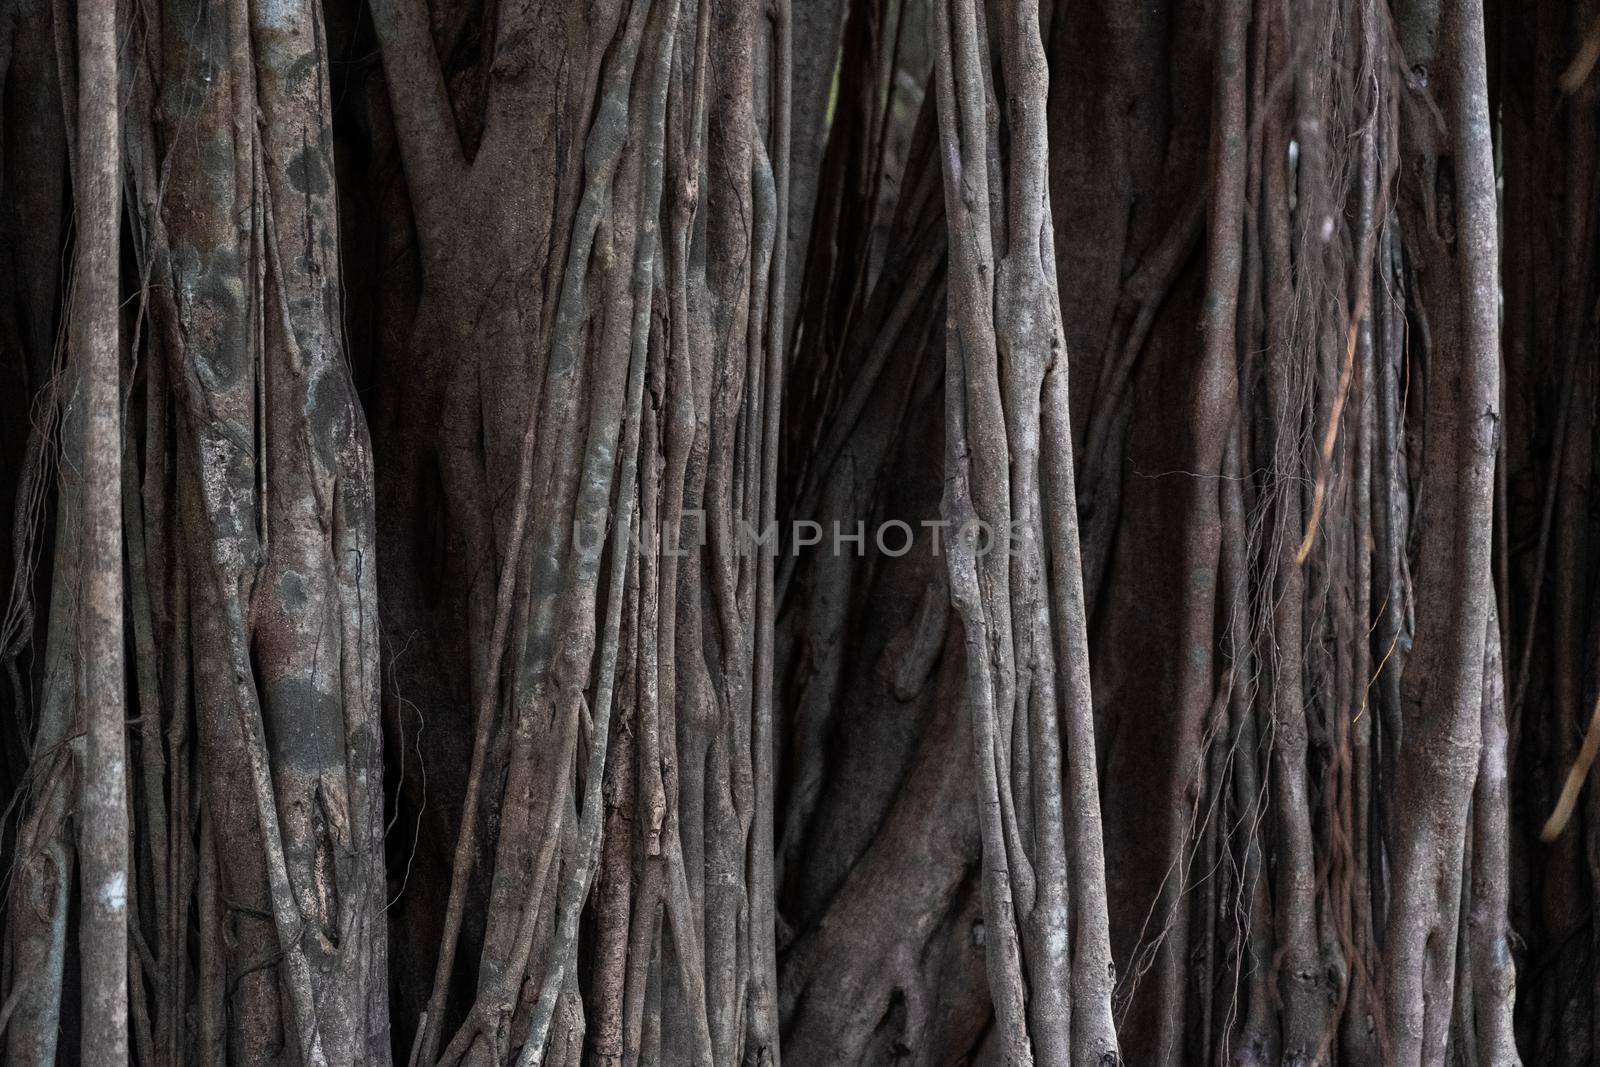 Bayan tree aerial roots by snep_photo